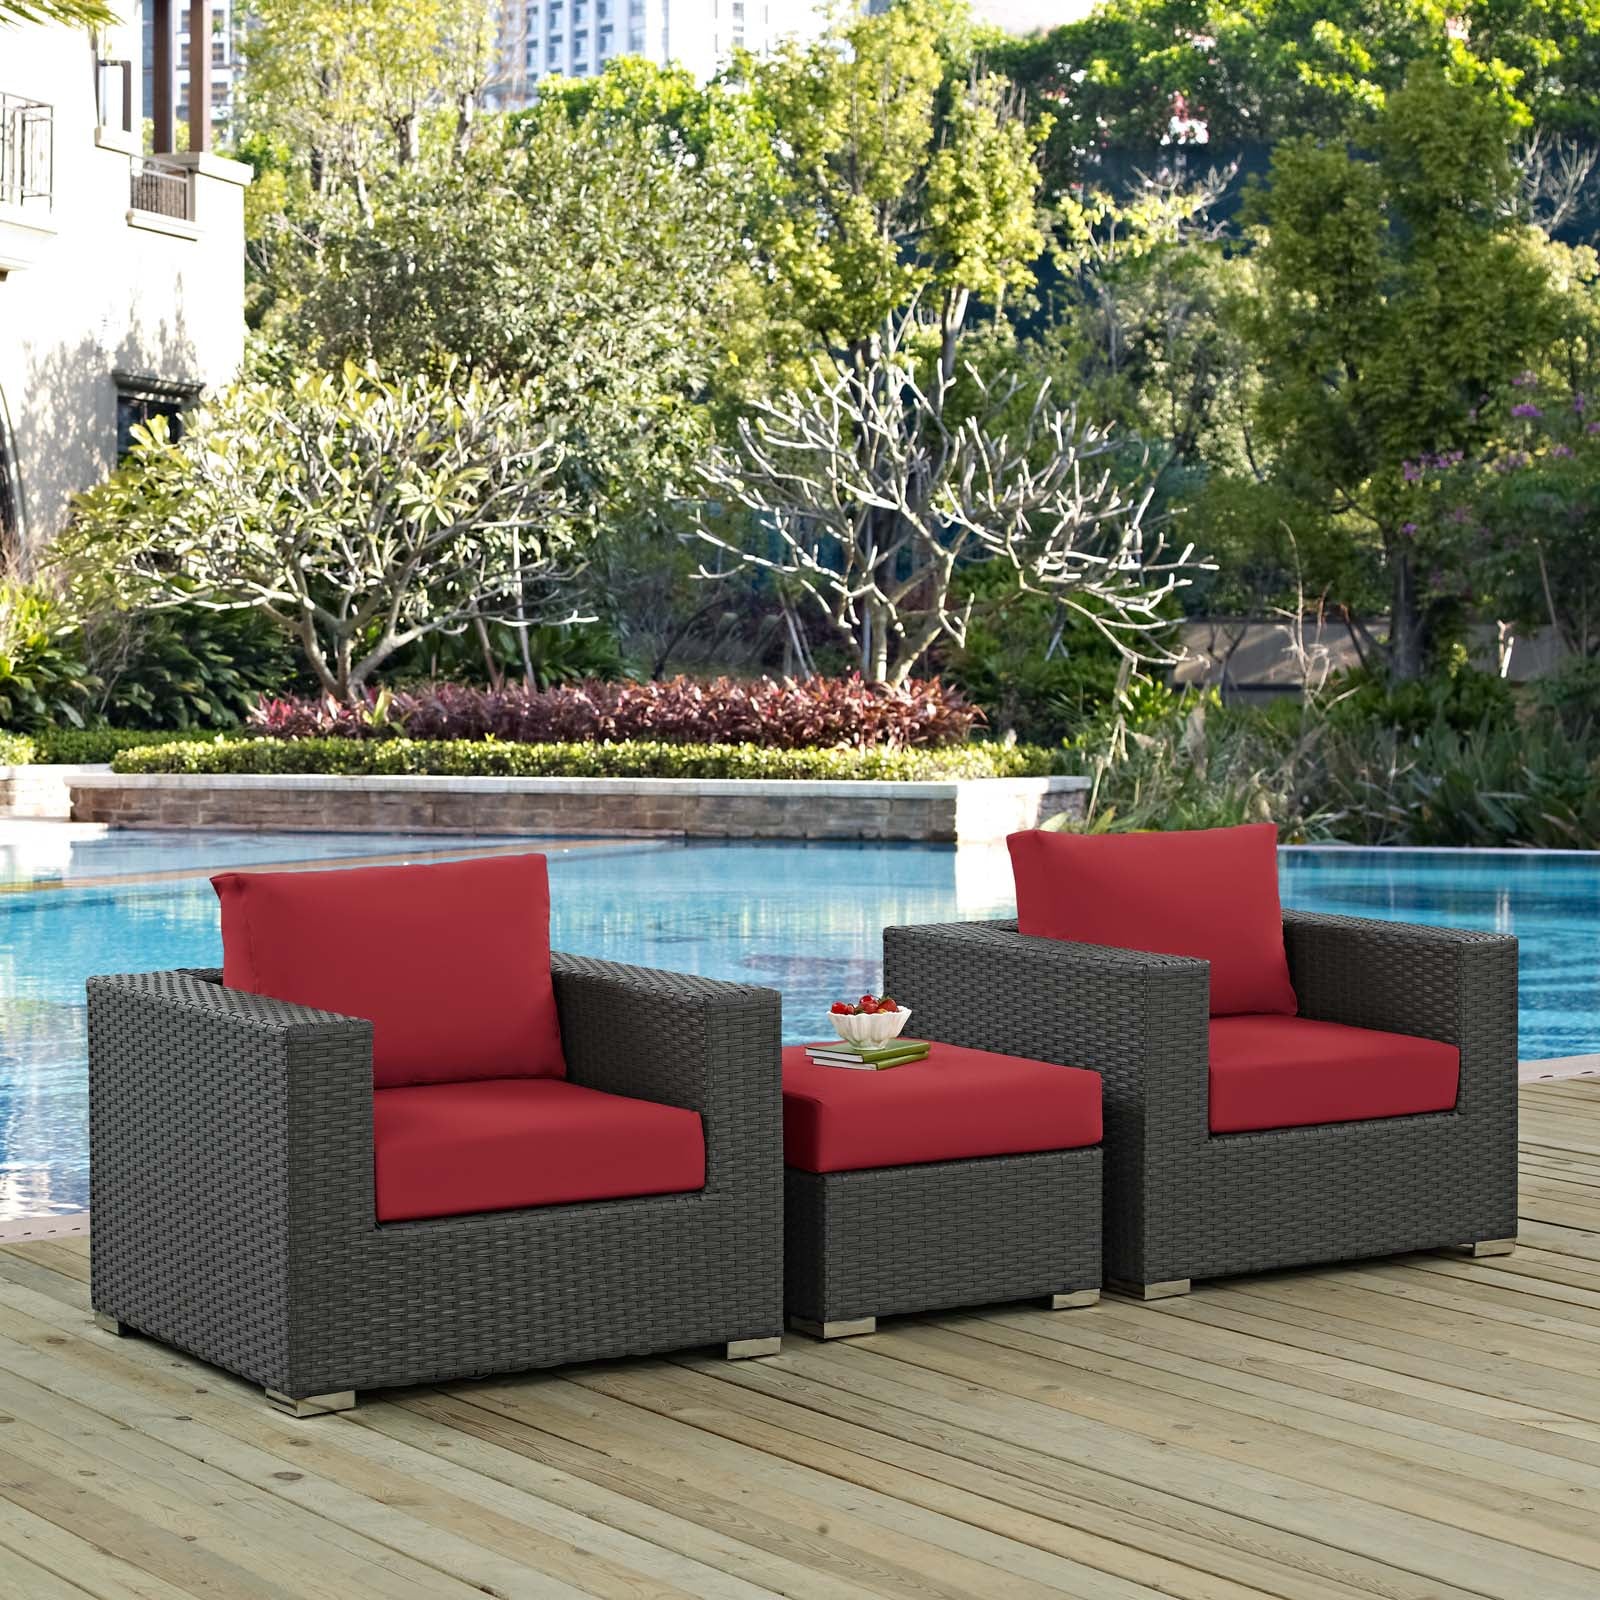 Modway Outdoor Conversation Sets - Sojourn 3 Piece Outdoor Patio Sunbrella Sectional Set Canvas Red